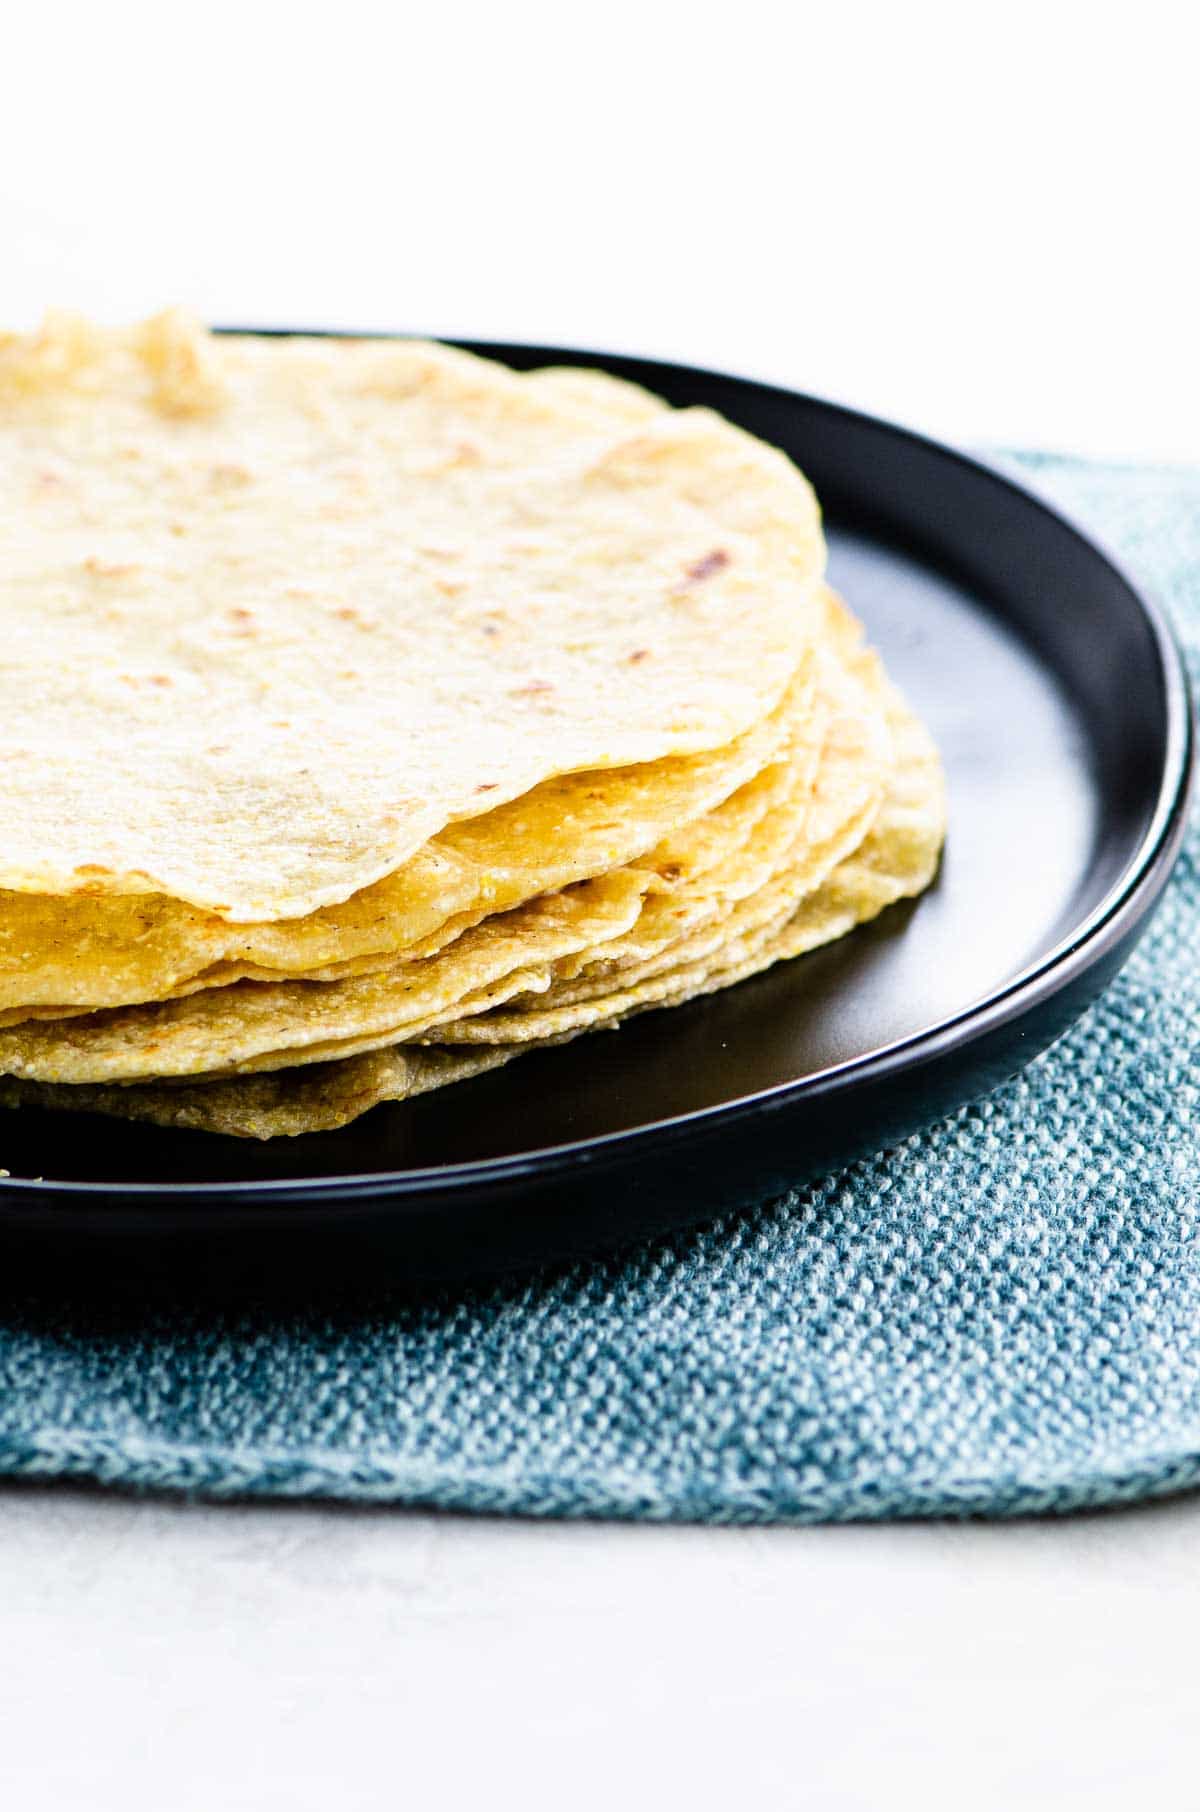 a stack of soft corn tortillas on a black plate on a blue textile background